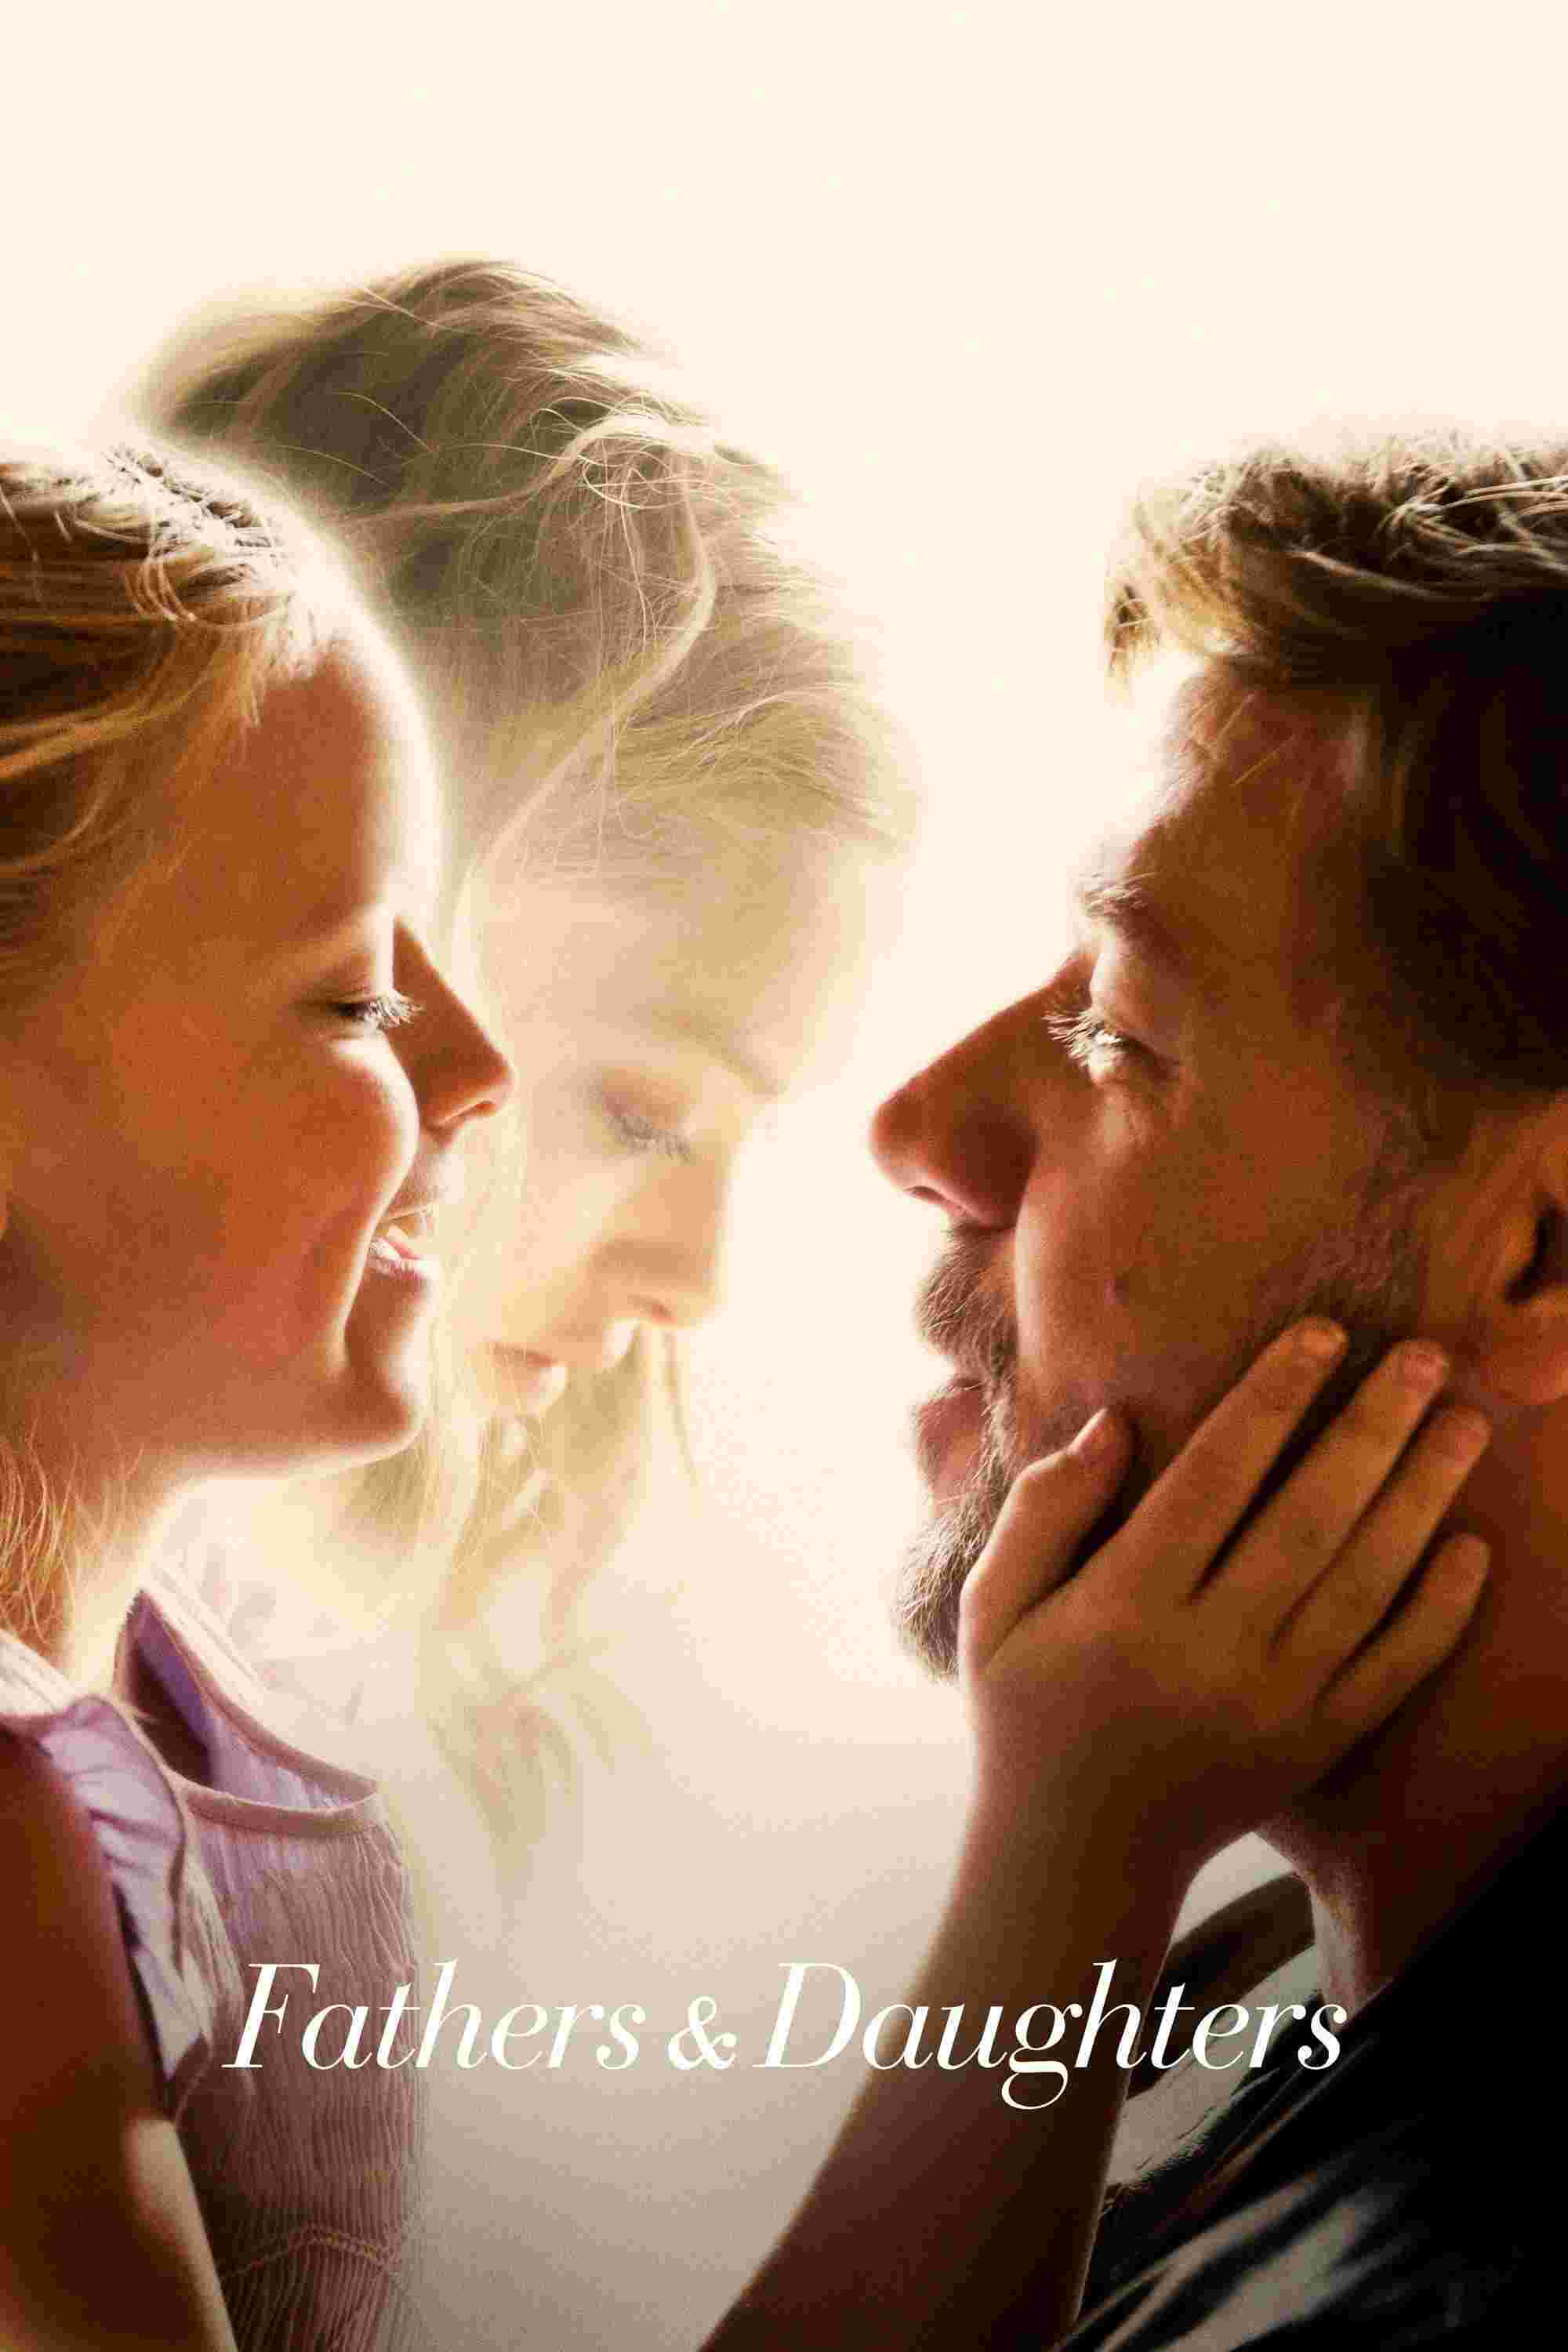 Fathers & Daughters (2015) Russell Crowe